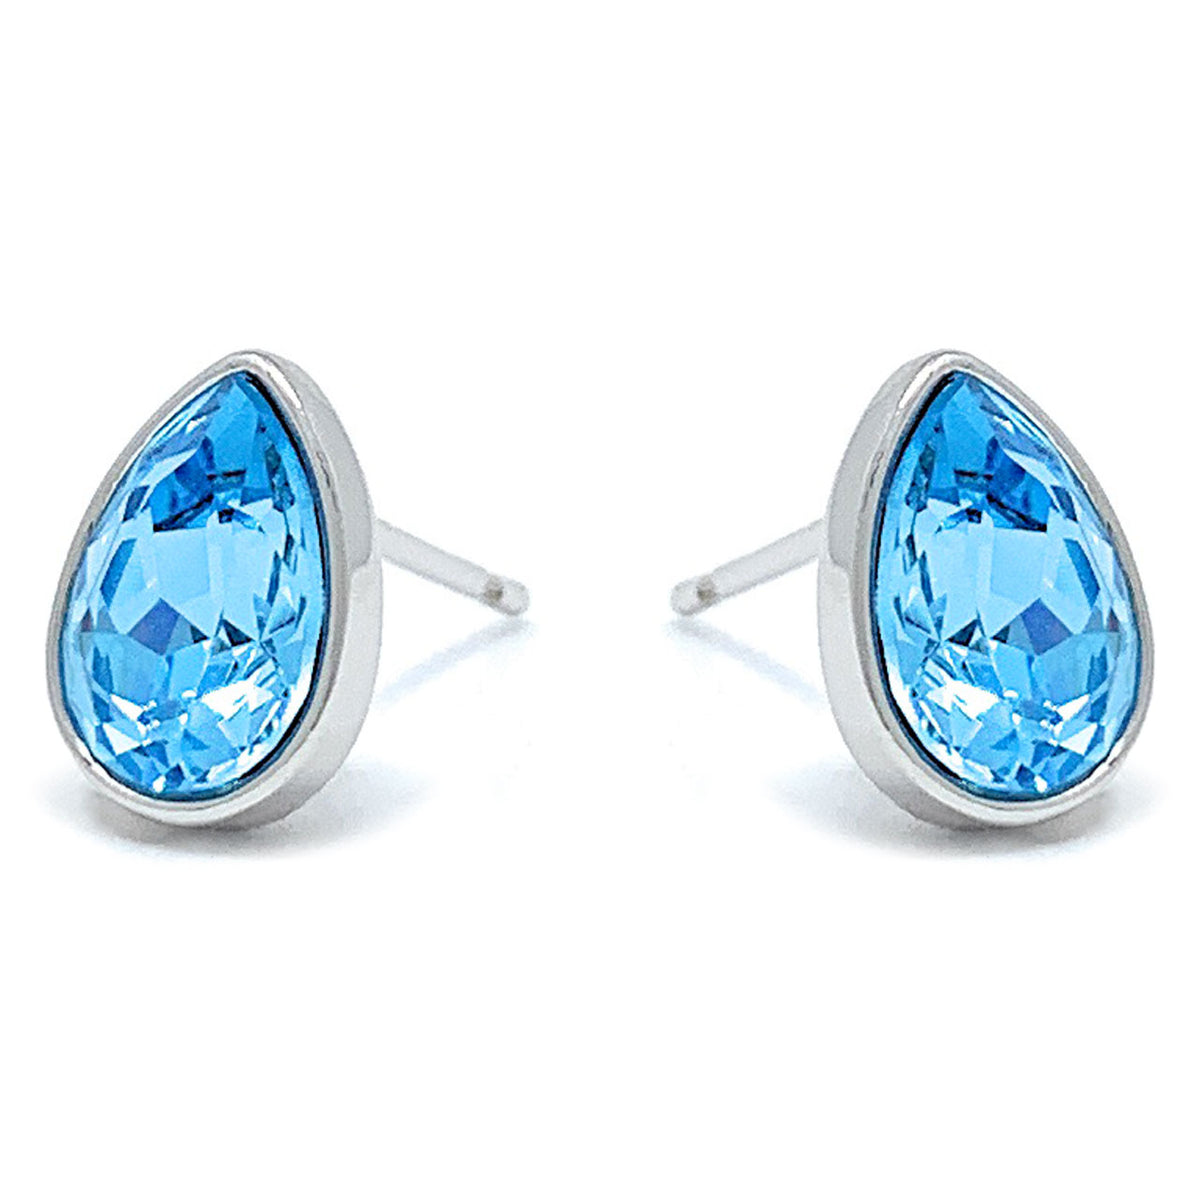 Mary Small Stud Earrings with Blue Aquamarine Drop Crystals from Swarovski Silver Toned Rhodium Plated - Ed Heart